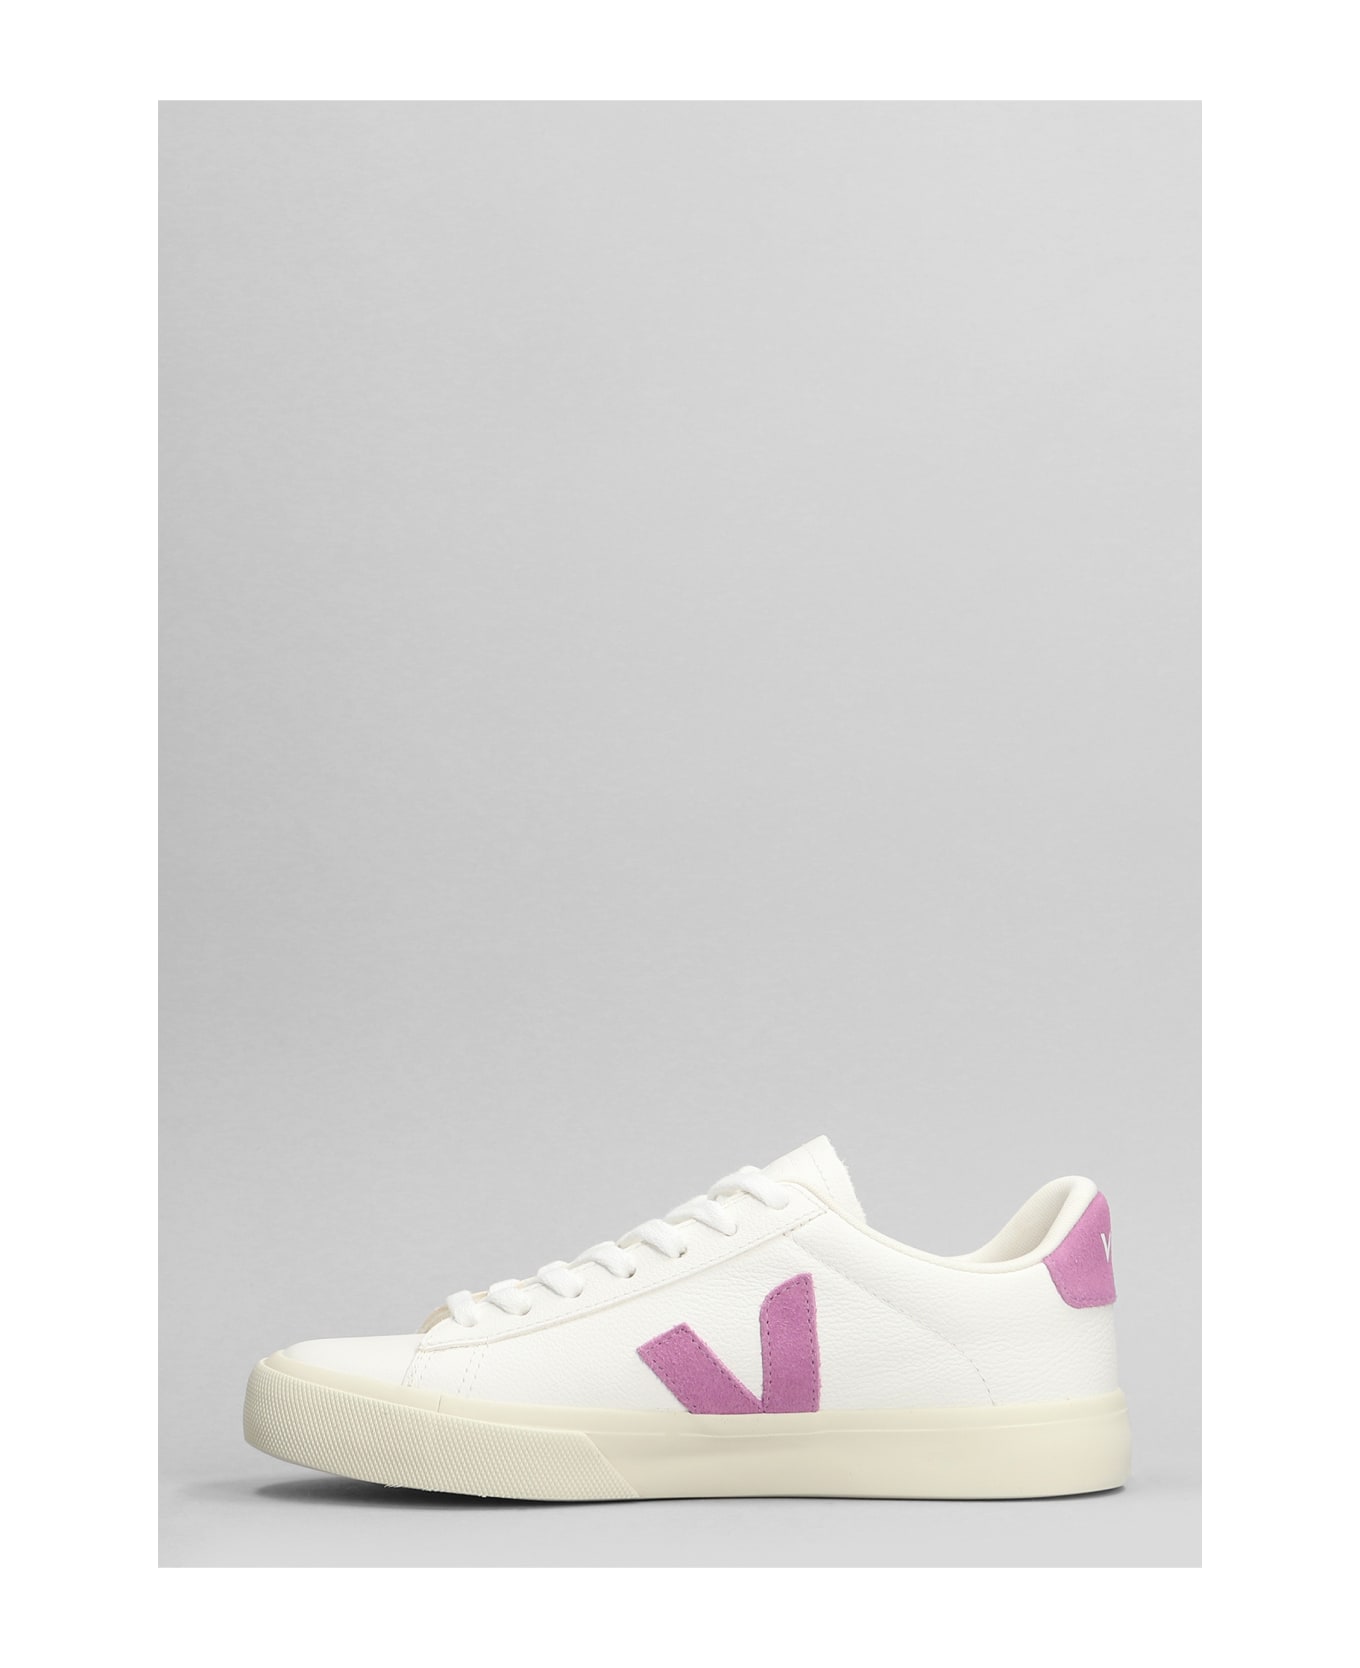 Veja Campo Sneakers In White Leather - white